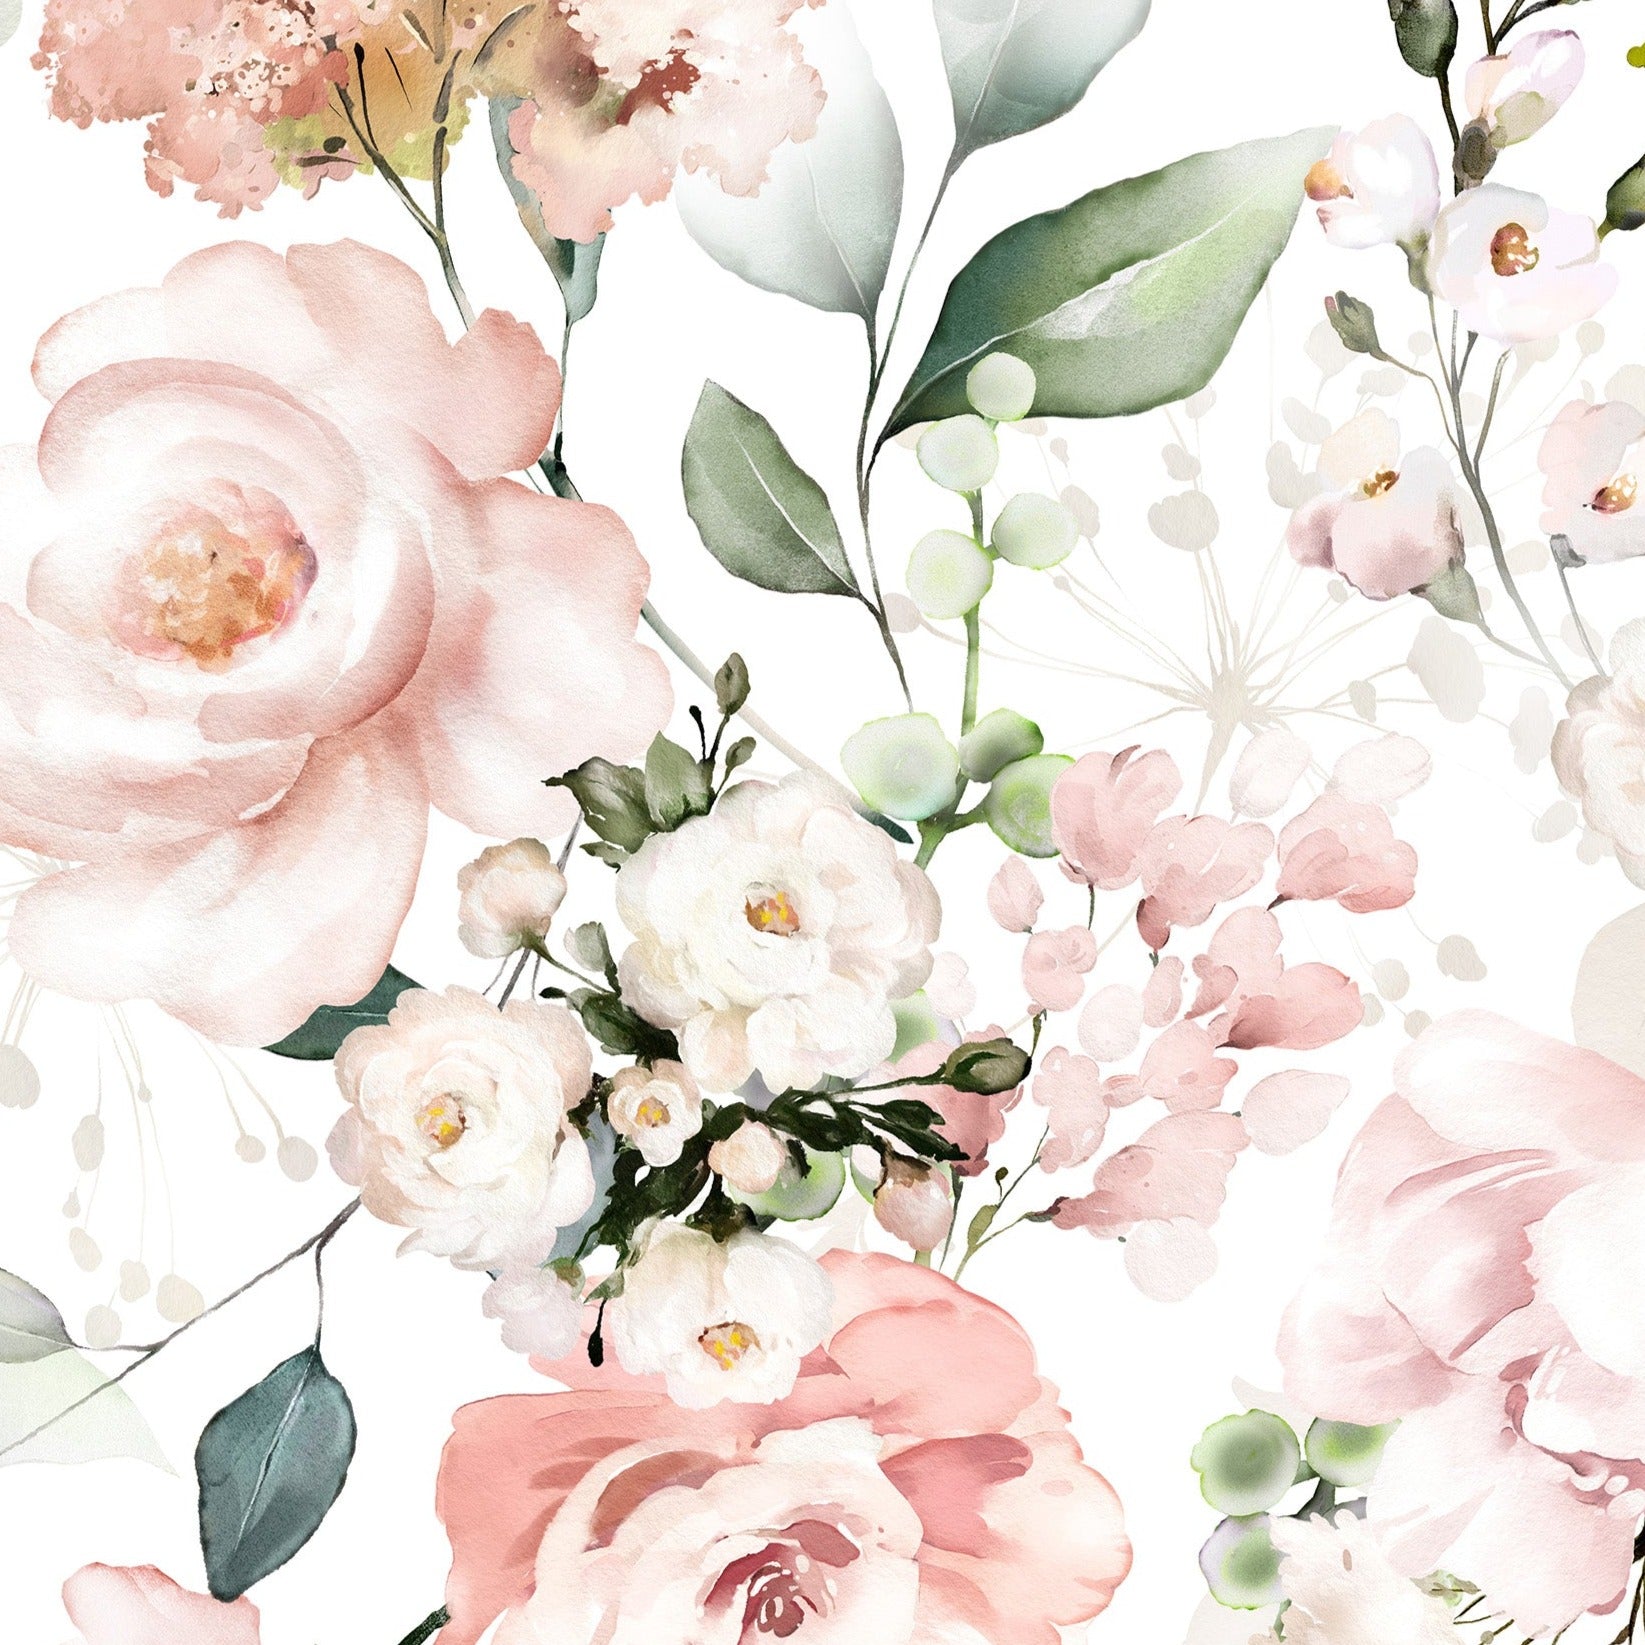 A detailed close-up of the Pink Floral and Herbs Wallpaper - 50", showcasing a delicate and romantic pattern of soft pink roses, fluffy hydrangeas, and subtle greenery. The watercolor effect adds a dreamy and artistic touch to the design, creating a tranquil and beautiful botanical scene.